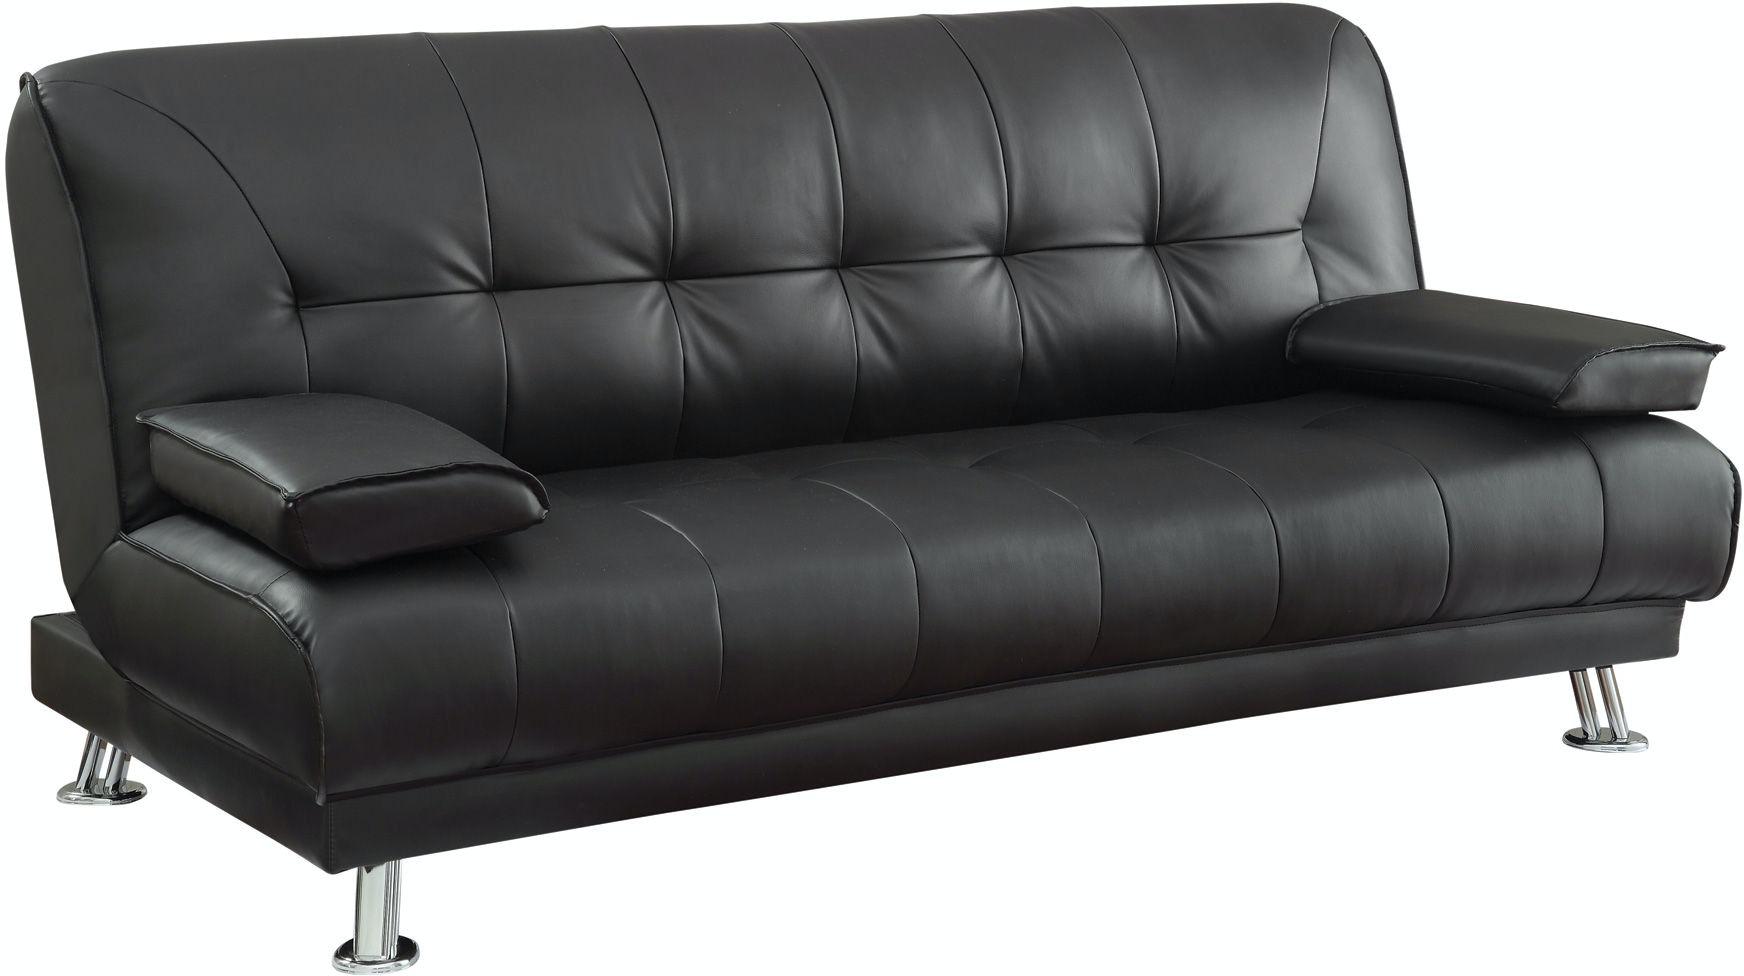 Transitional Sofa bed 300205 Pierre 300205 in Black Leatherette